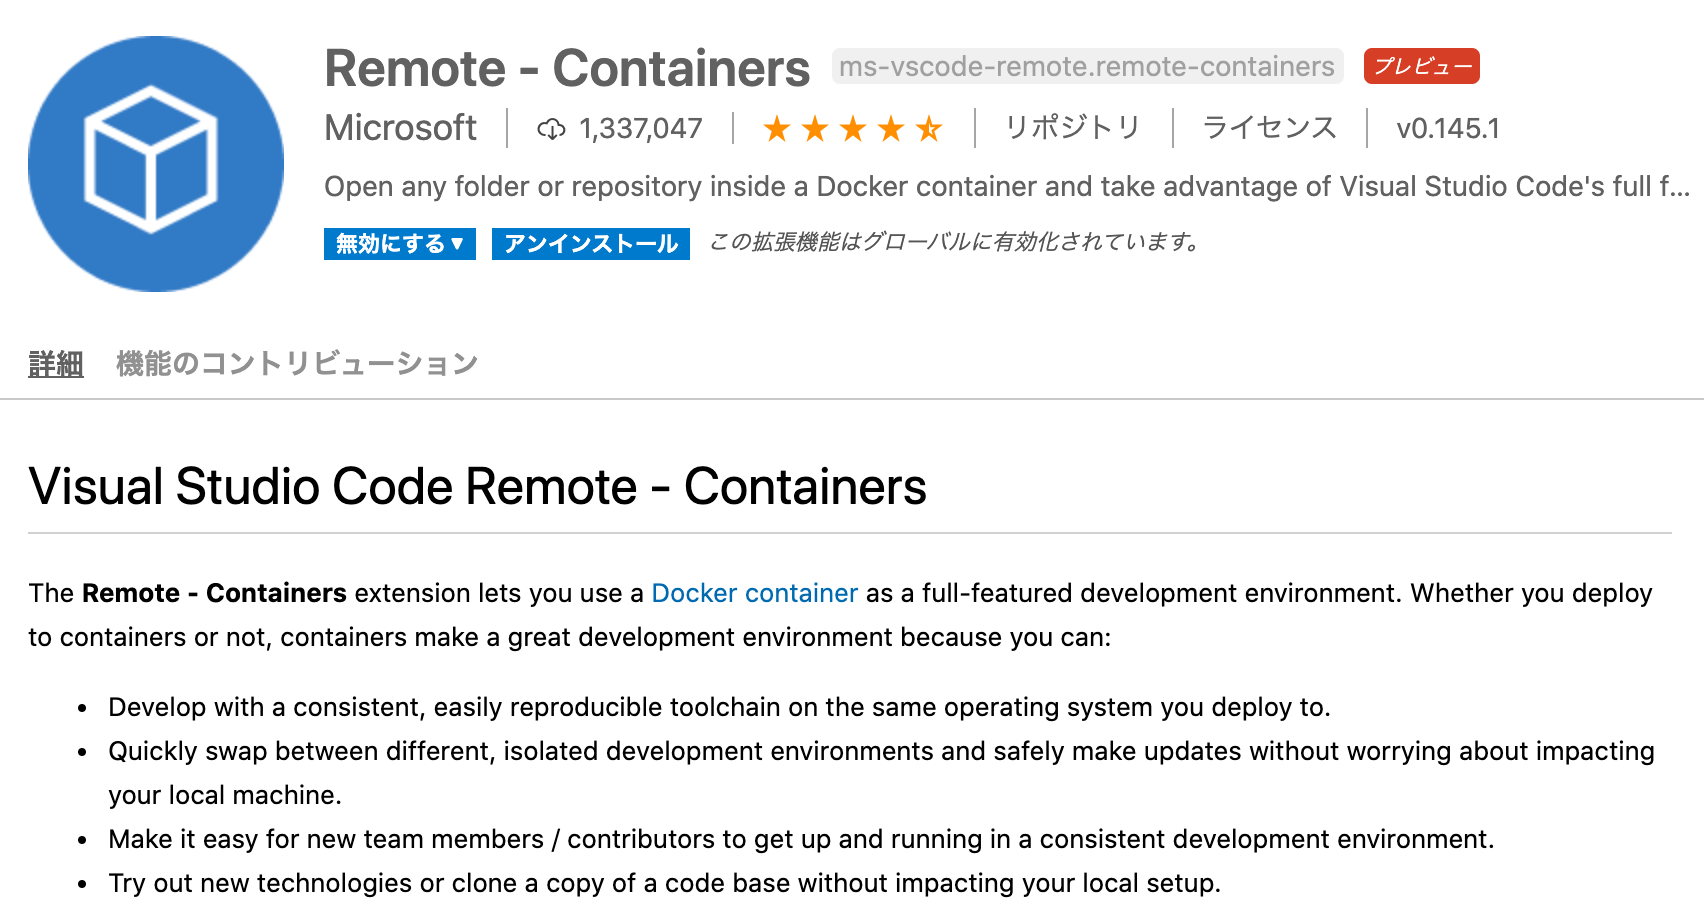 Remote containers